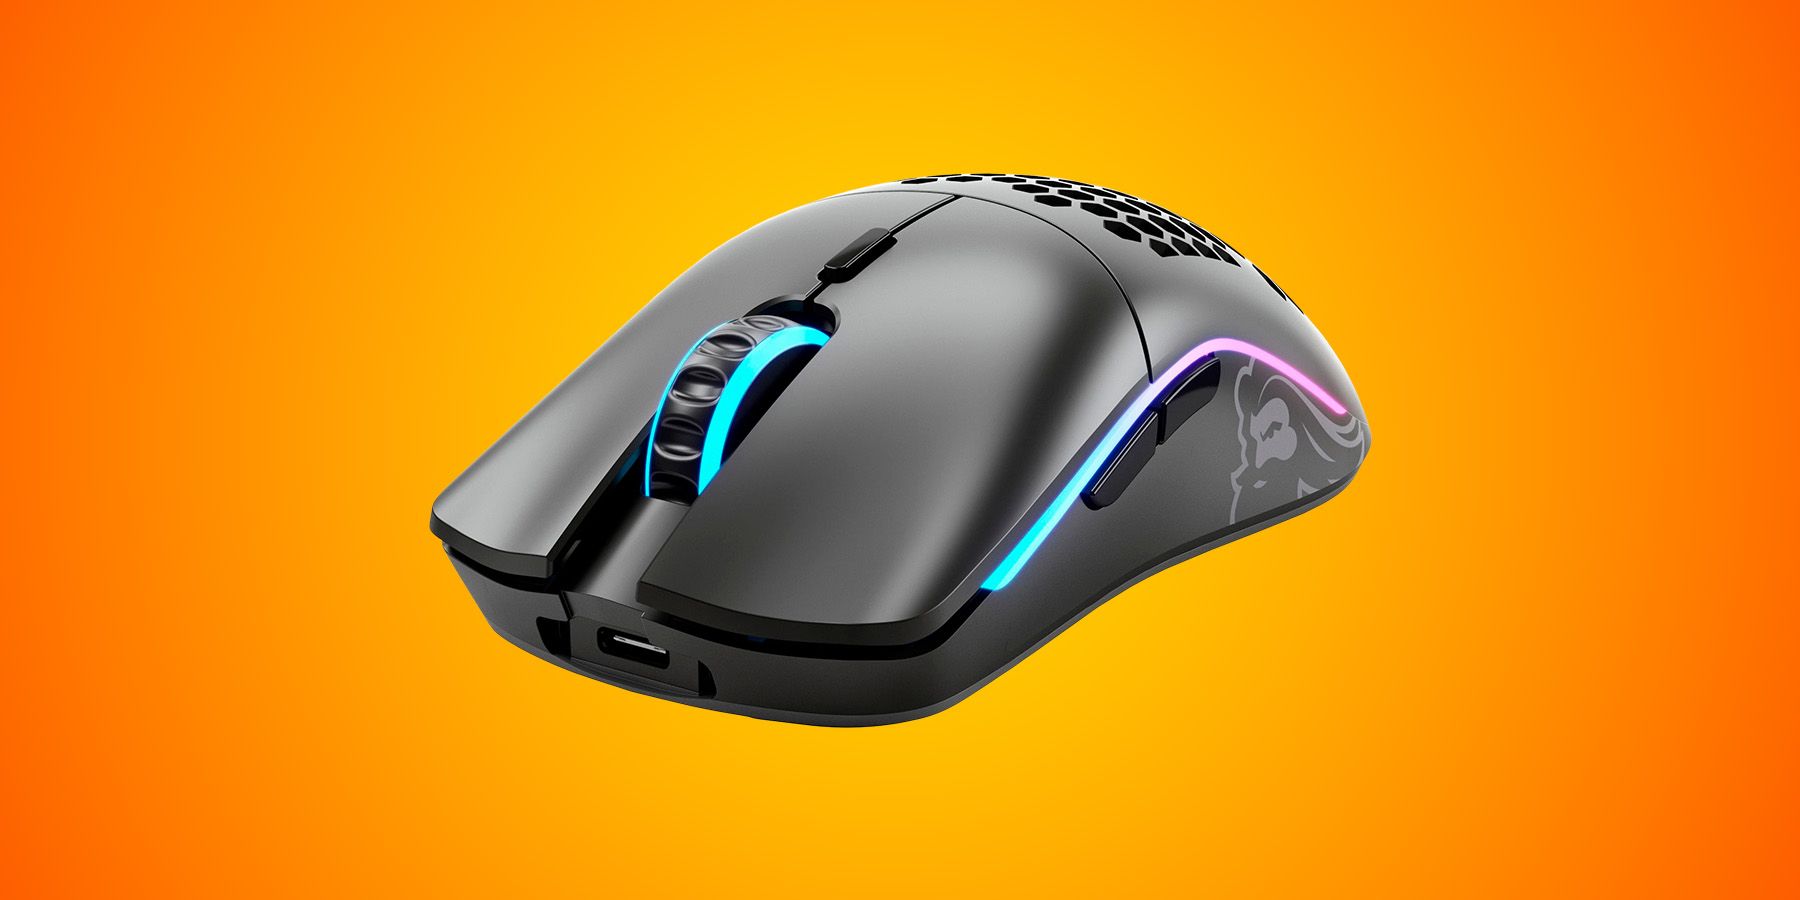 Model O Wireless Glorious Gaming Mouse Review Thumb